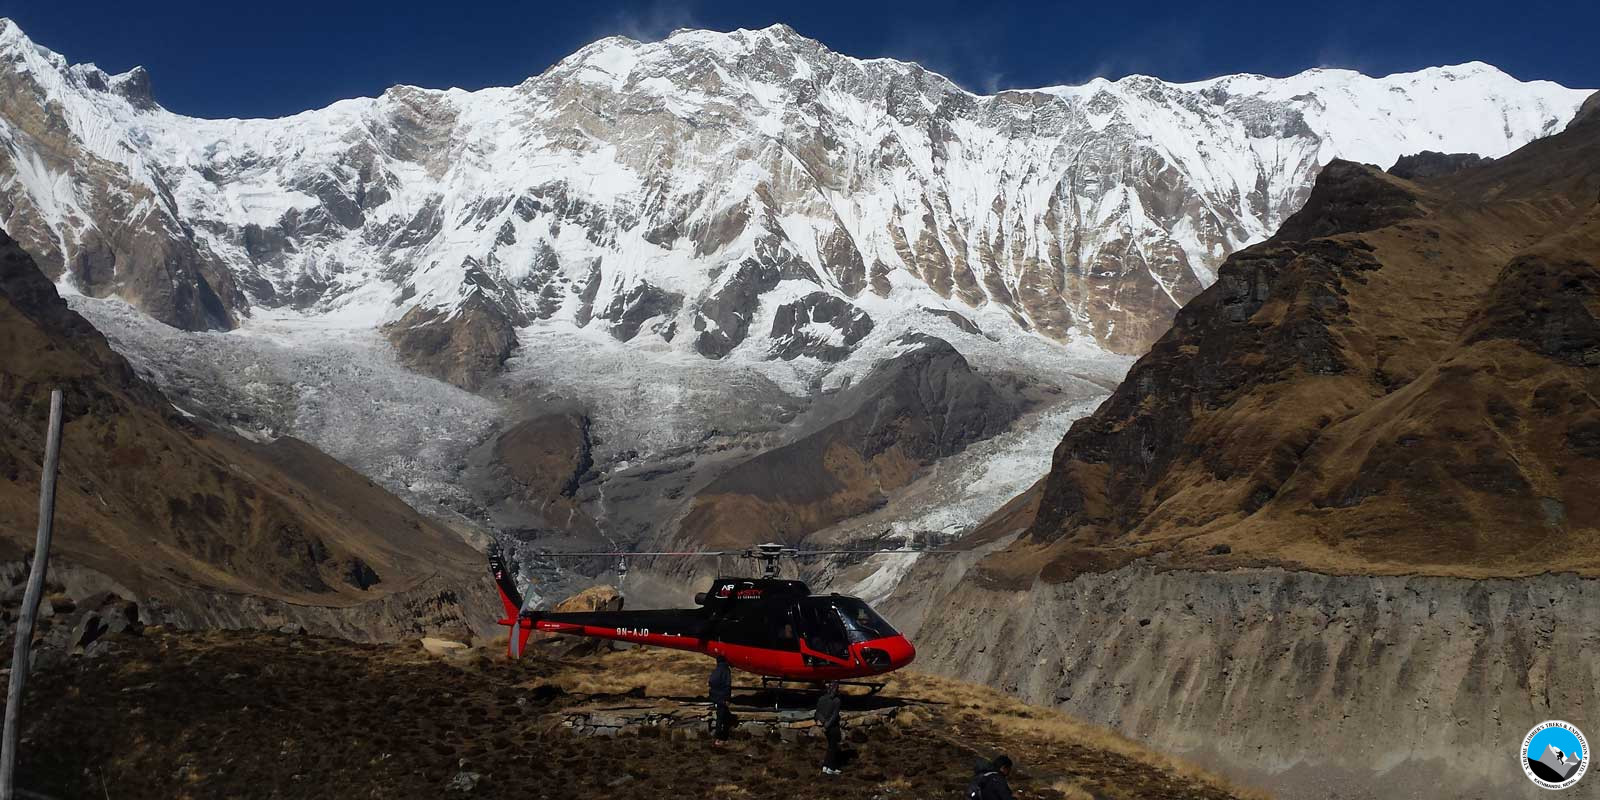 Annapurna Base Camp 4,130m Helicopter Tour